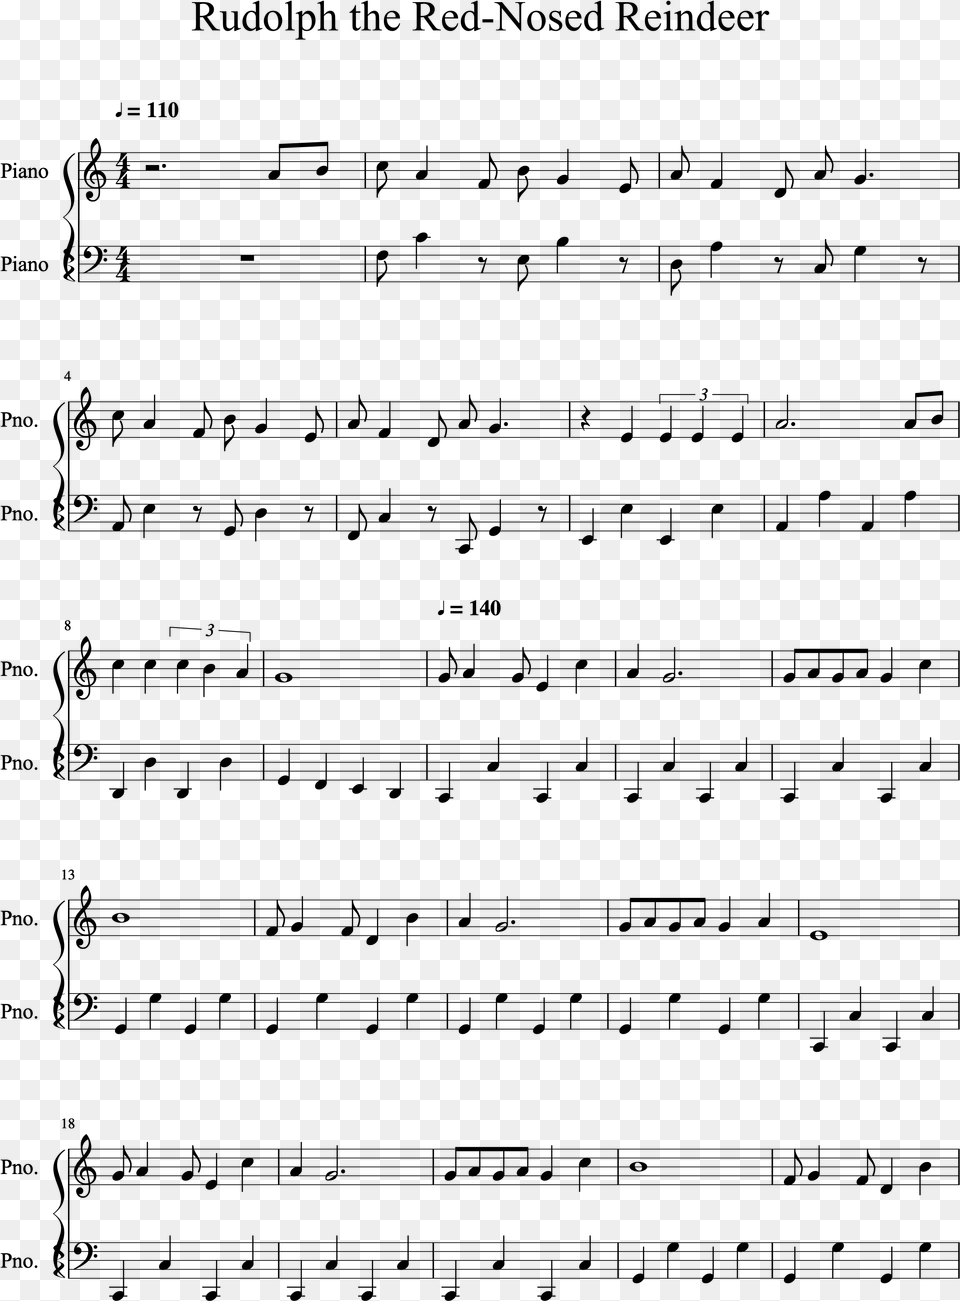 Rudolph The Red Nosed Reindeer Walking Bass Score Inisheer Piano Sheet Music, Gray Png Image